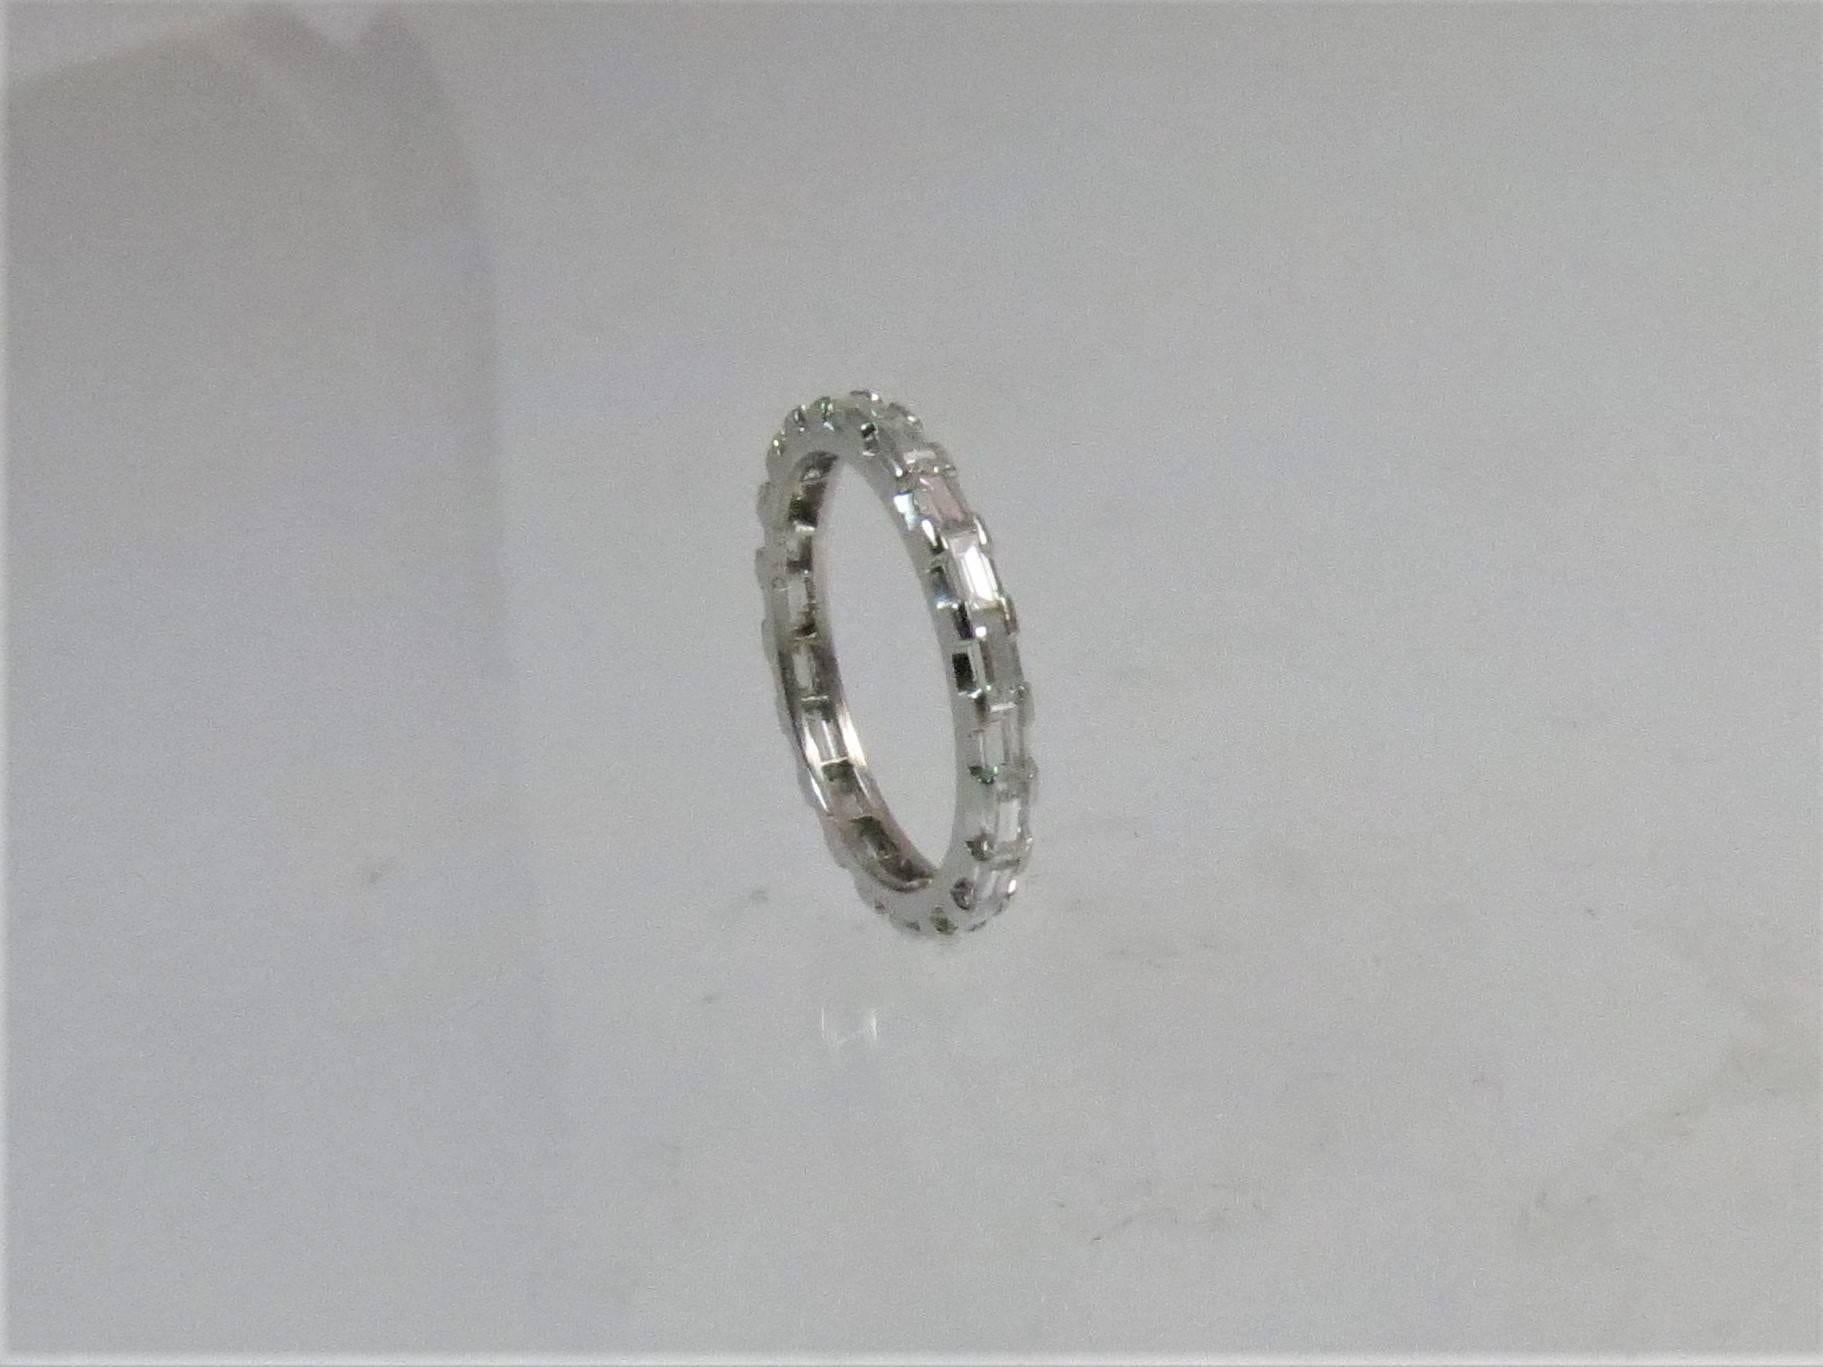 Platinum wedding band, bar set all around with 20 straight baguette diamonds weighing approximately 1.00cts, GH color, VS clarity,
Finger size 6